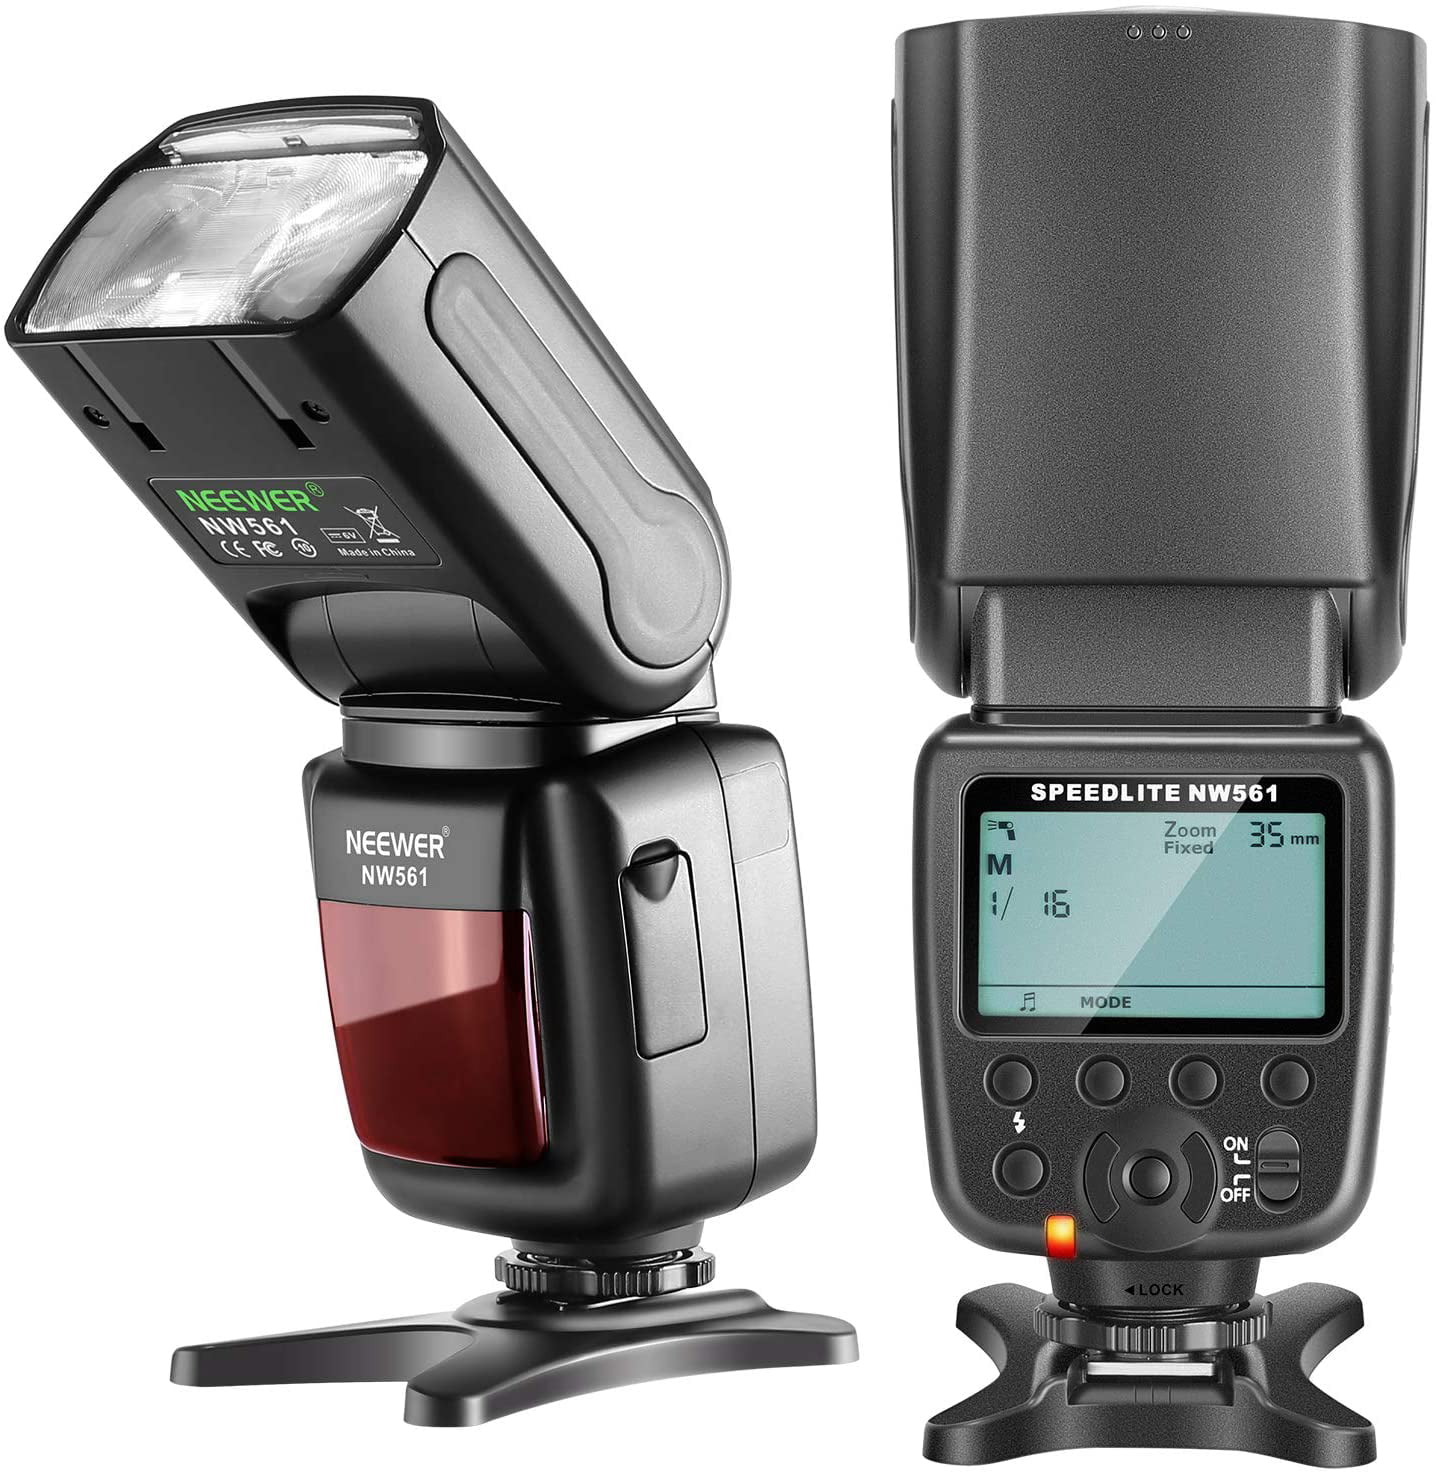 Verbonden Snel Roos NW561 LCD Display Flash Speedlite for Canon Nikon Panasonic Olympus Pentax  Fijifilm and Sony with Mi Hot Shoe,DSLR and Mirrorless Cameras with  Standard Hot Shoe - Walmart.com